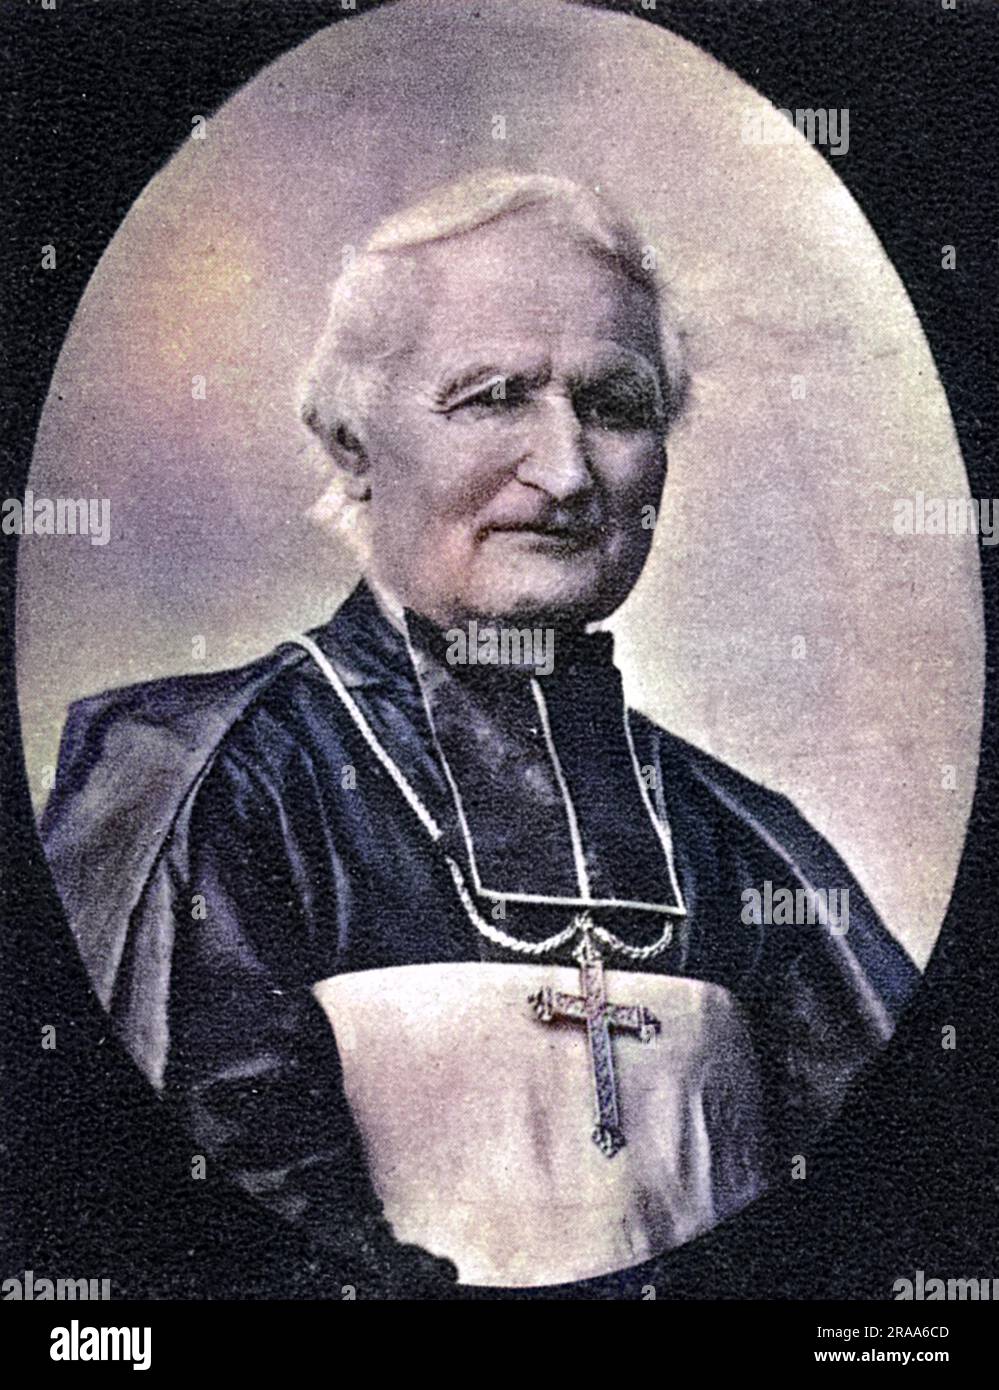 FELIX ANTOINE PHILIBERT DUPANLOUP French churchman, bishop of Orleans whose promotional efforts brought about the canonisation of Jeanne d'Arc.     Date: 1802 - 1878 Stock Photo